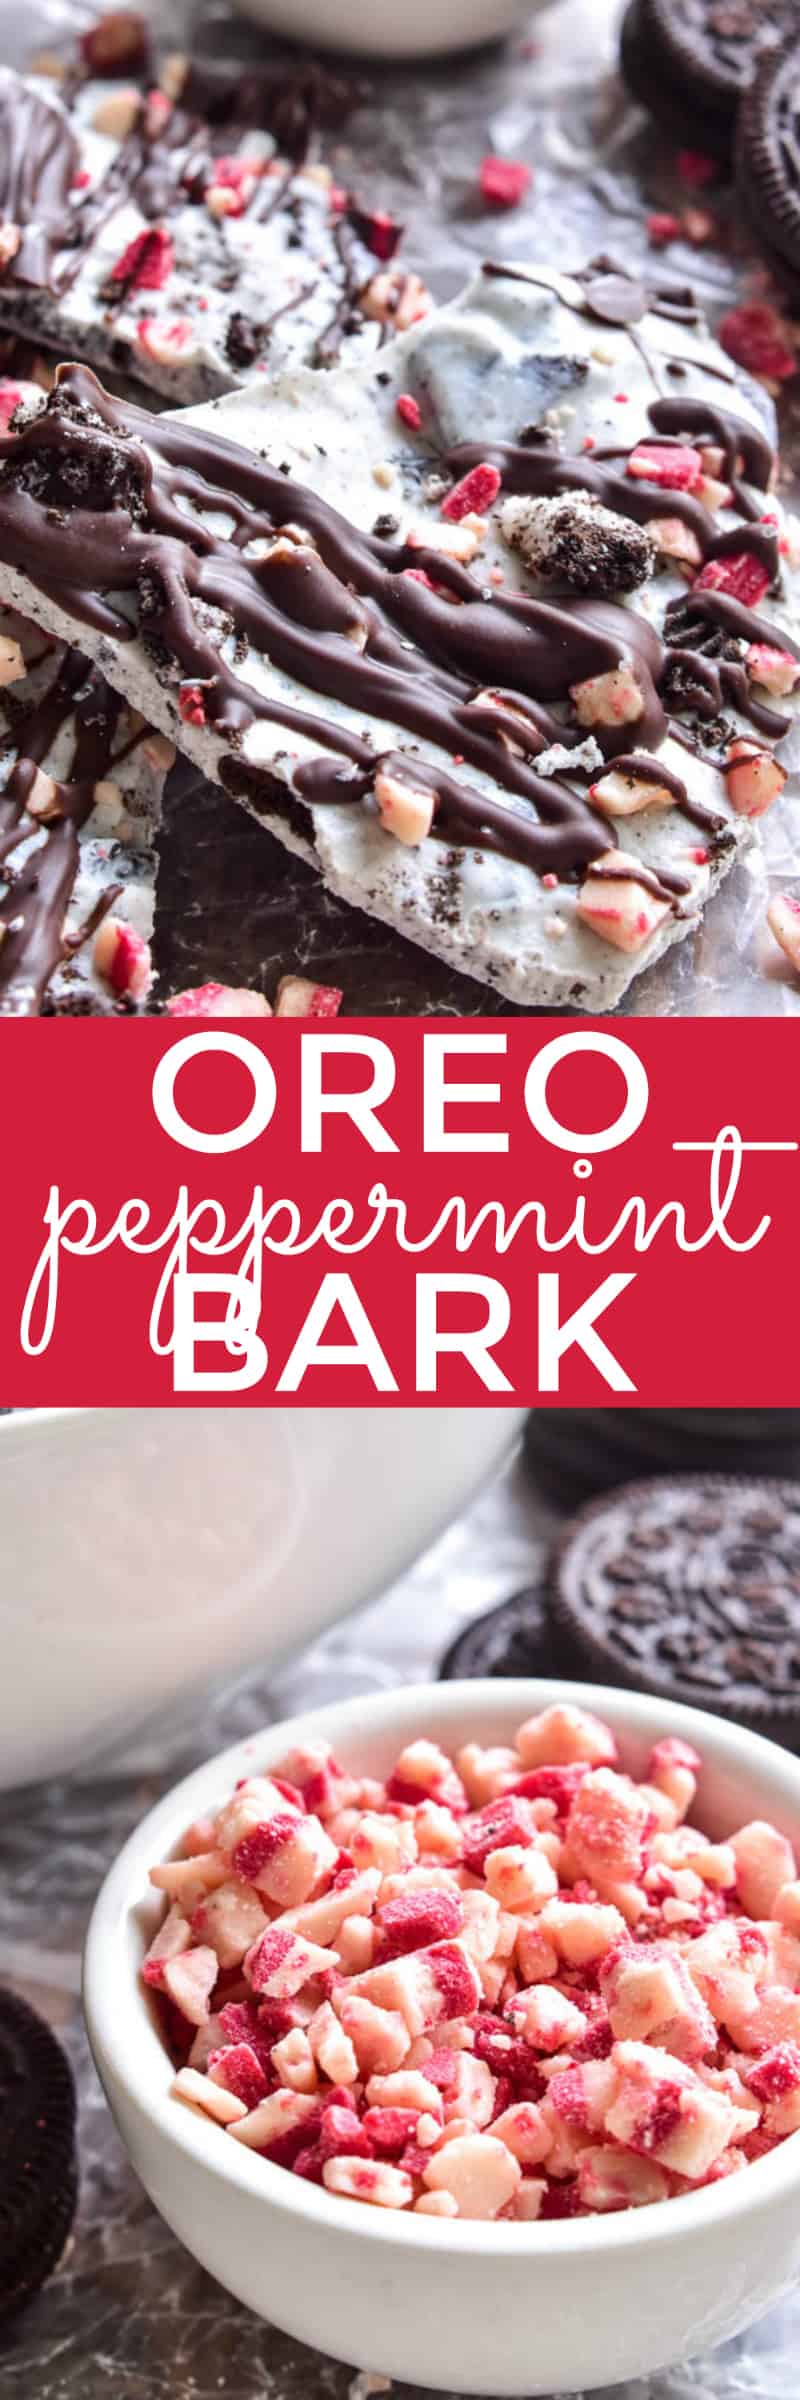 Oreo Peppermint Bark is one of our holiday favorites! Creamy white chocolate loaded with crushed Oreos and peppermint pieces, then topped with crunchy Oreos and a drizzle of milk chocolate. This bark is easy to make and SO addictive....and it makes the best holiday gift!